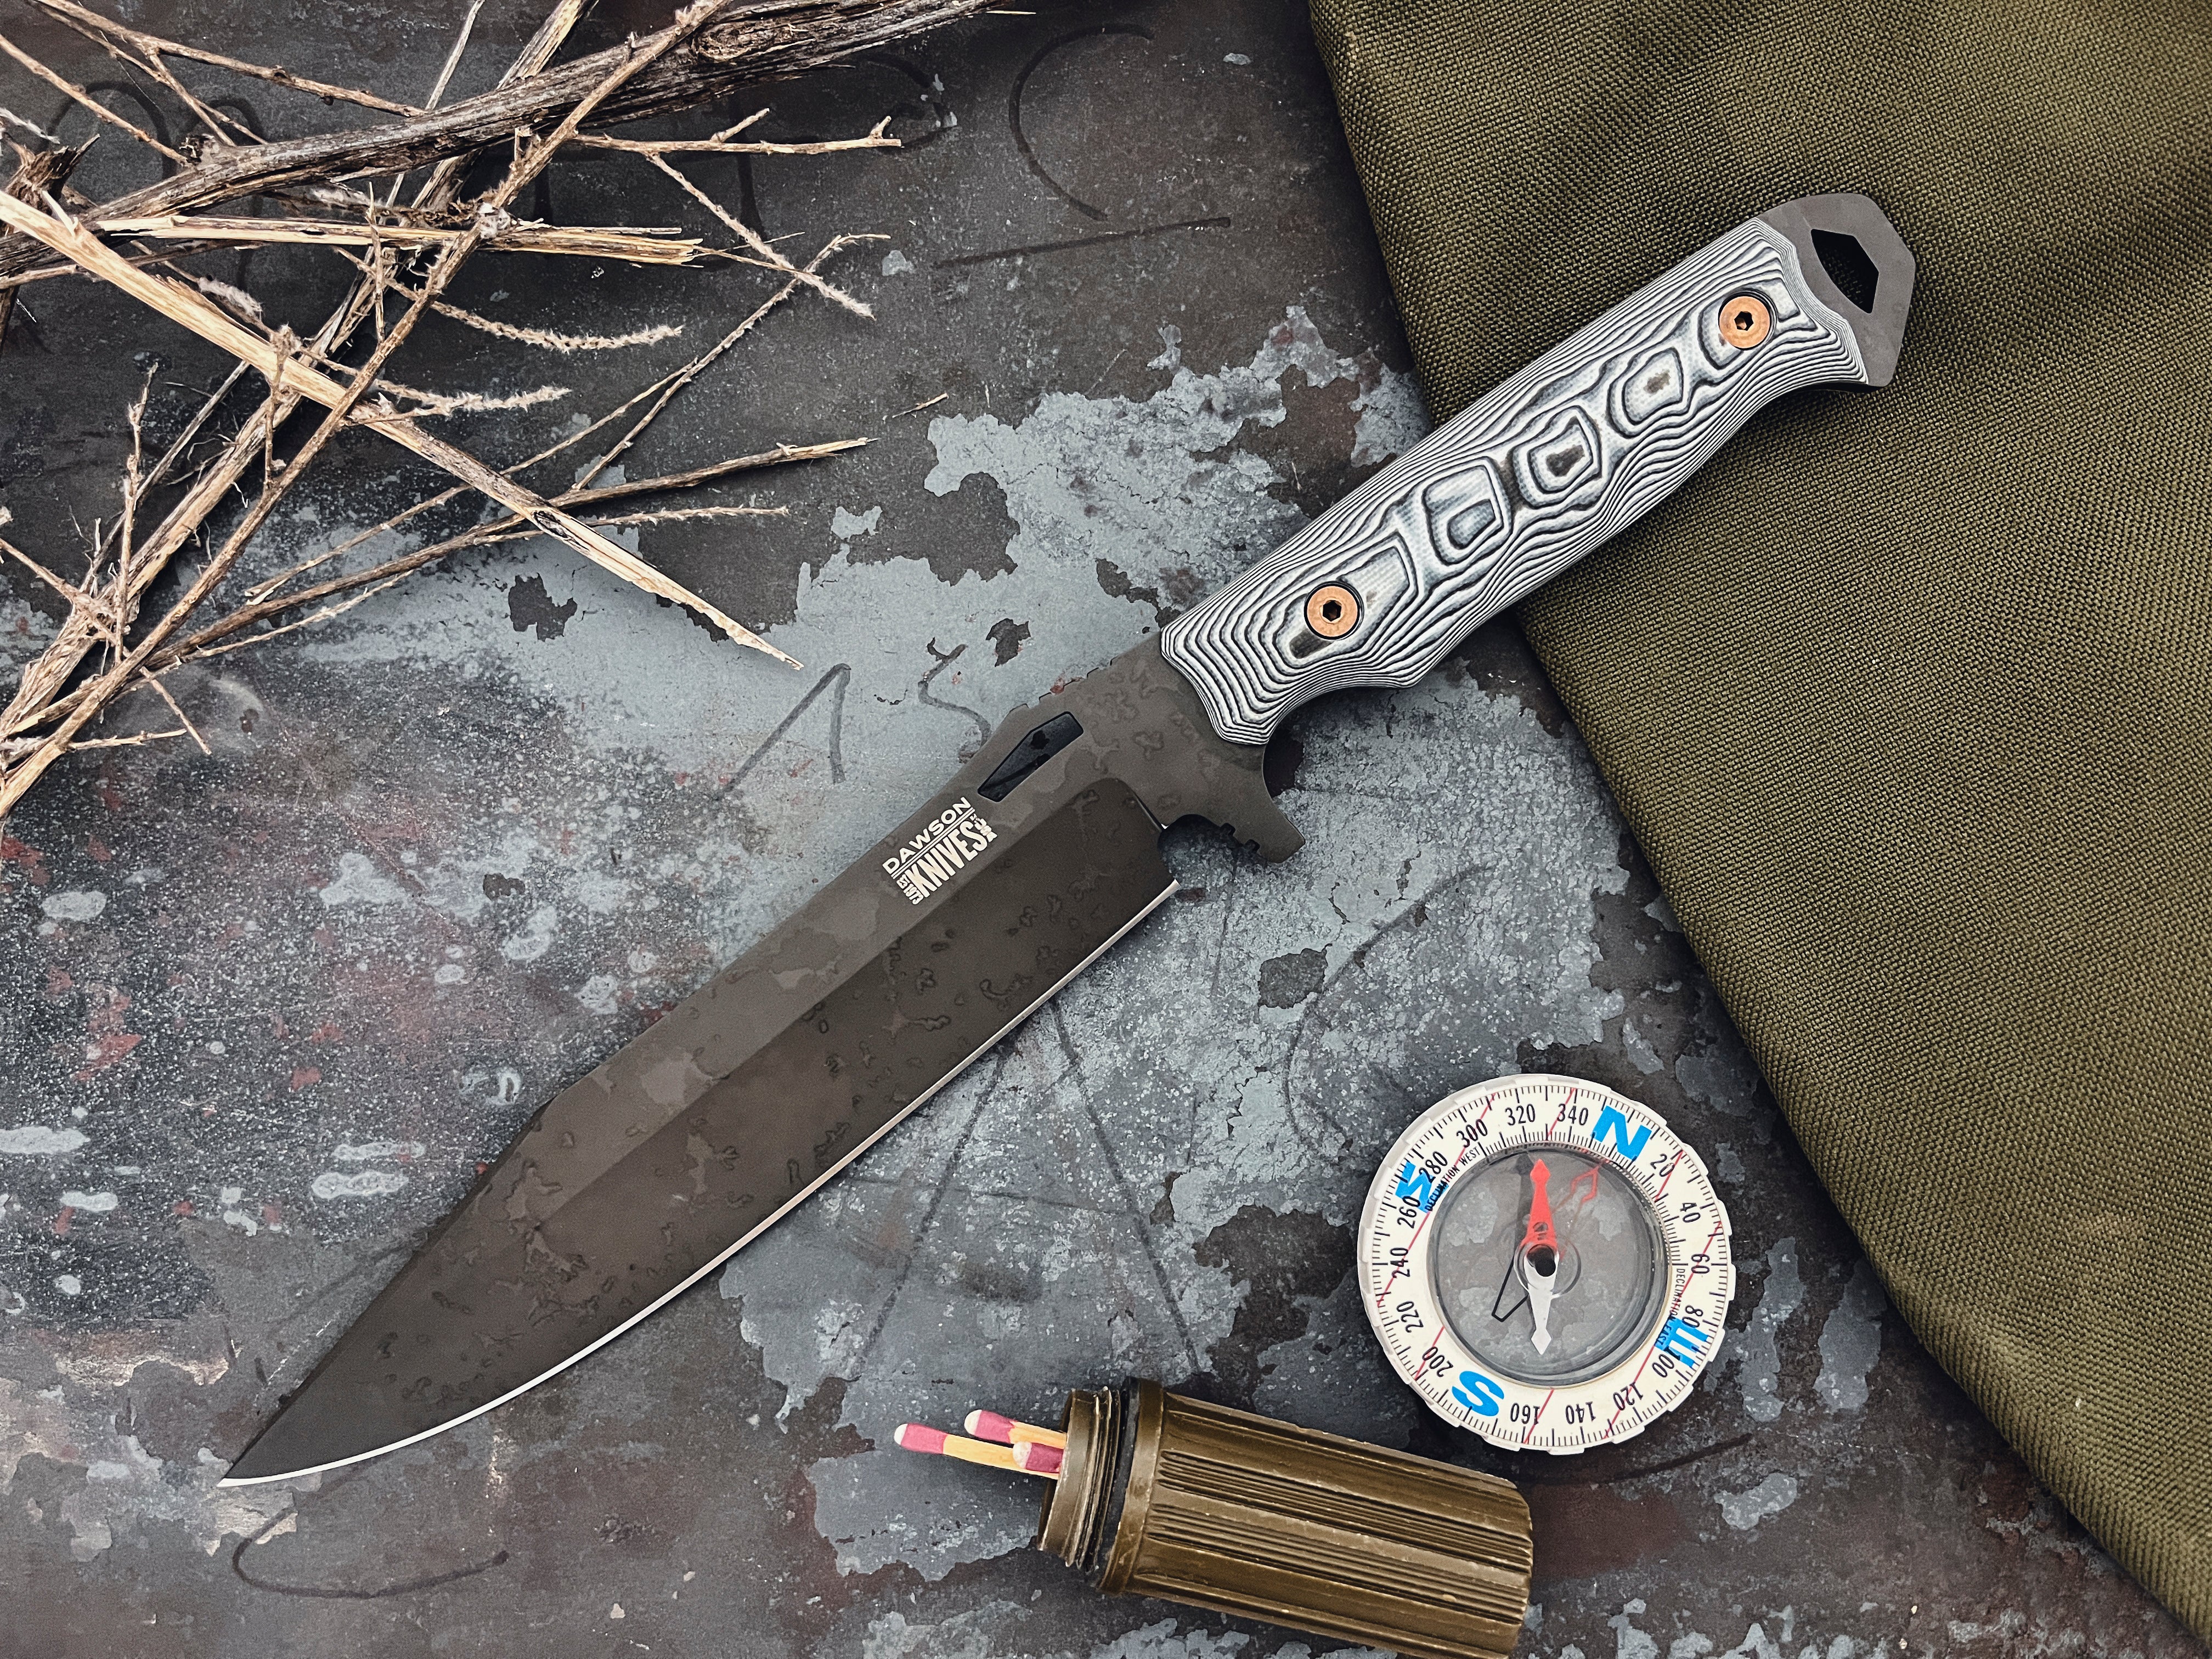 Marauder XL | Survival, Camp and Backpacking Knife Series | CPM-Magnacut Steel | Apocalypse Black Finish